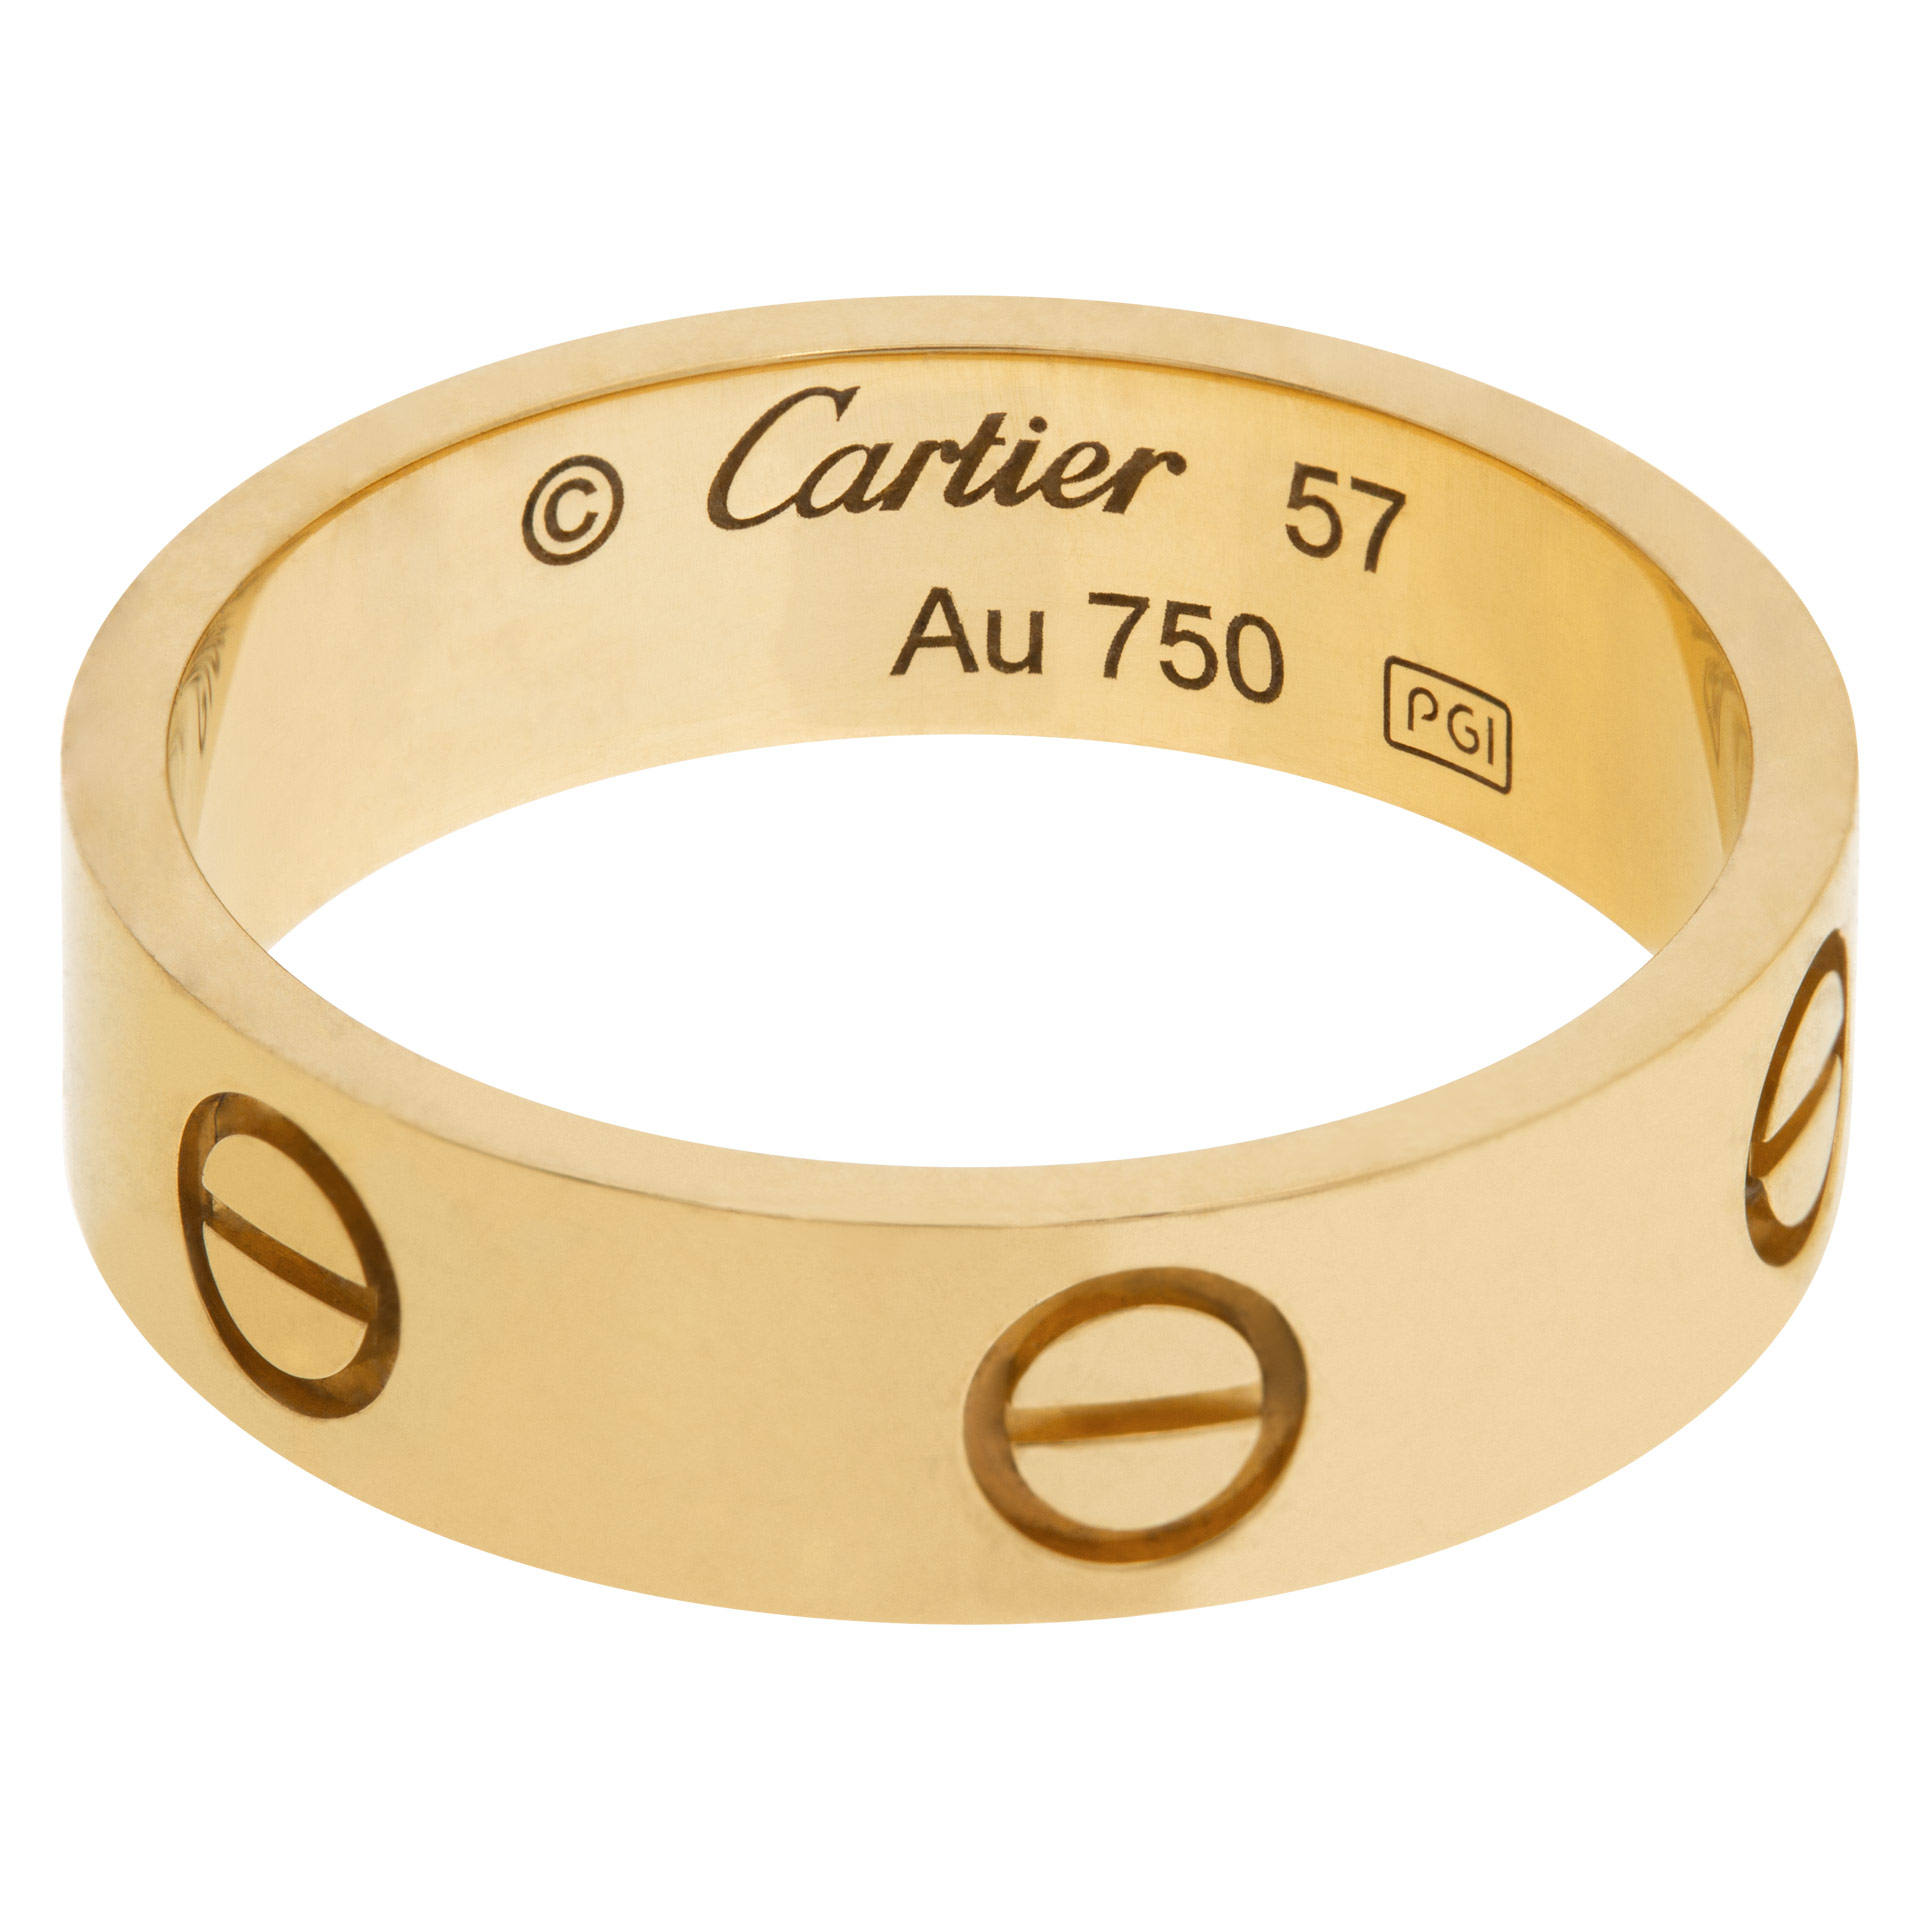 Cartier Love ring in 18k | Gray & Sons Jewelers